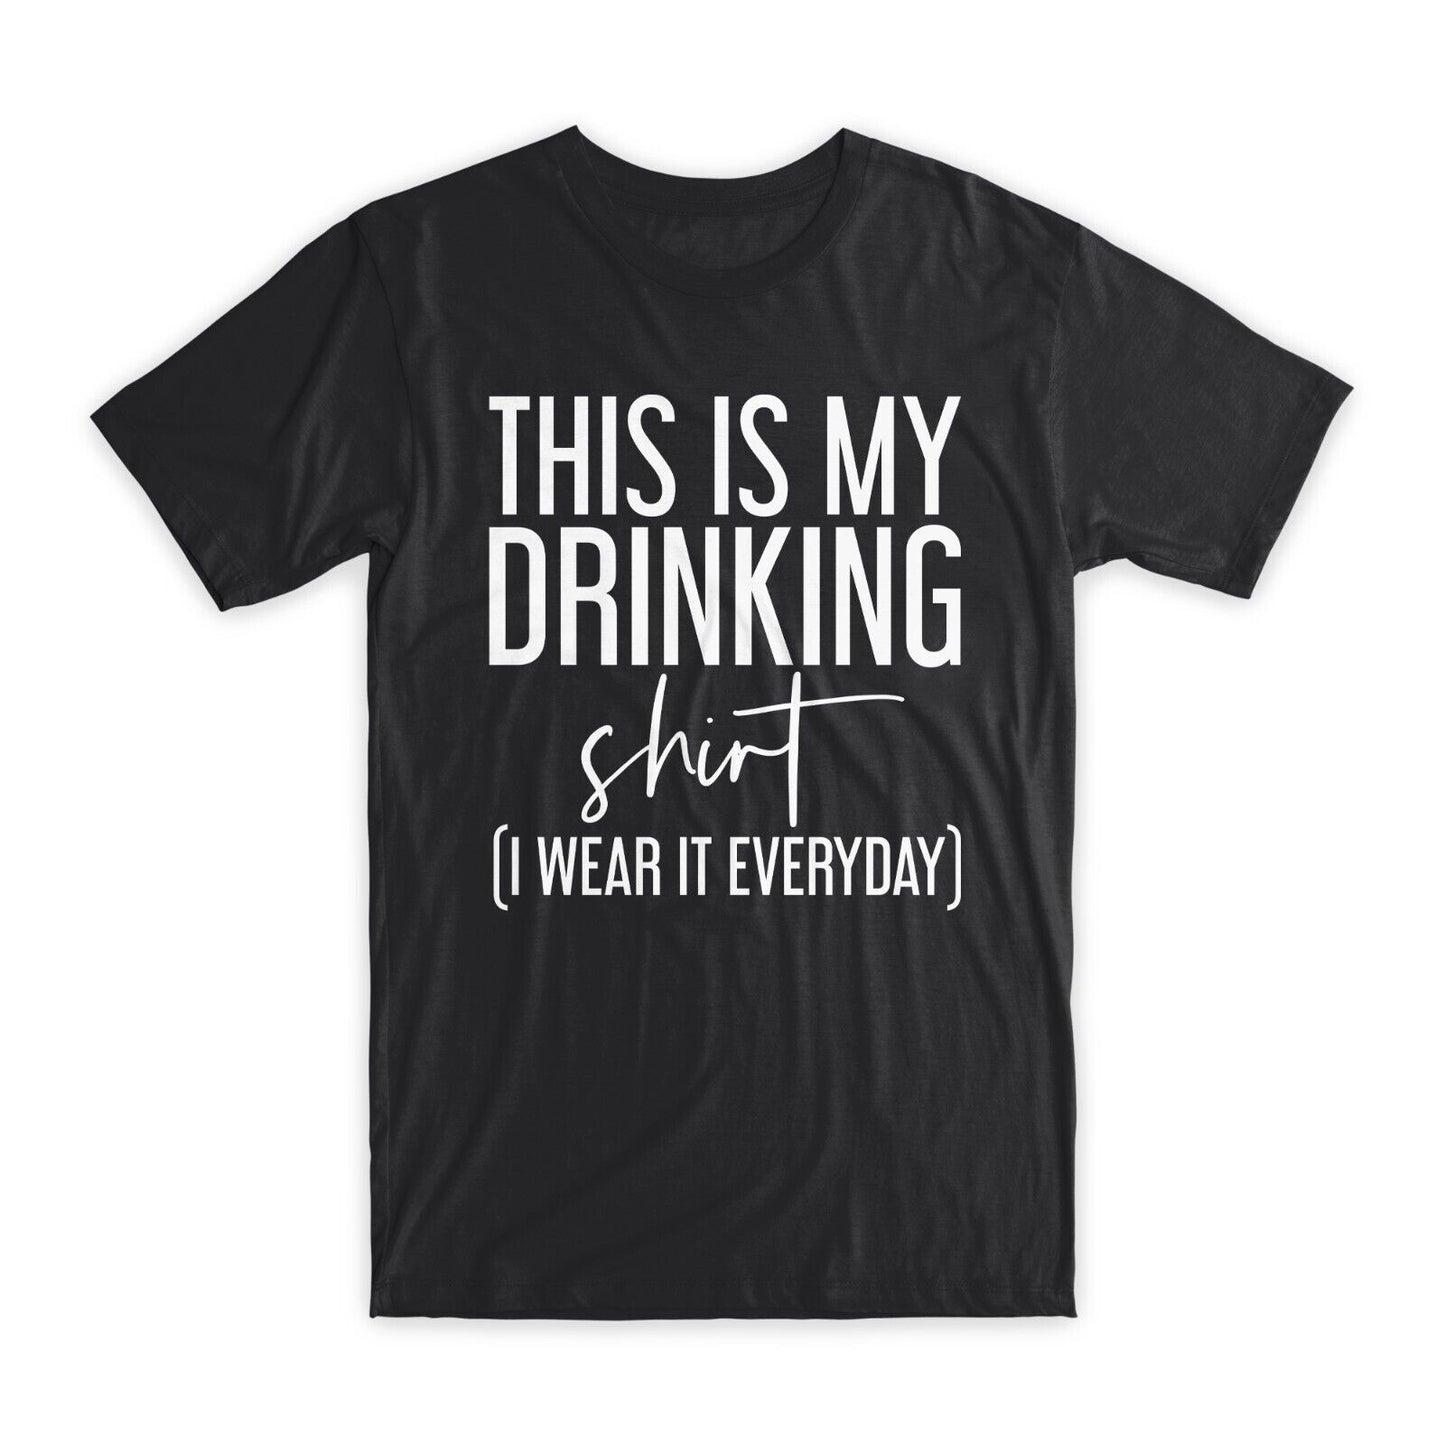 This is My Drinking Shirt T-Shirt Premium Cotton Crew Neck Funny Tees Gifts NEW